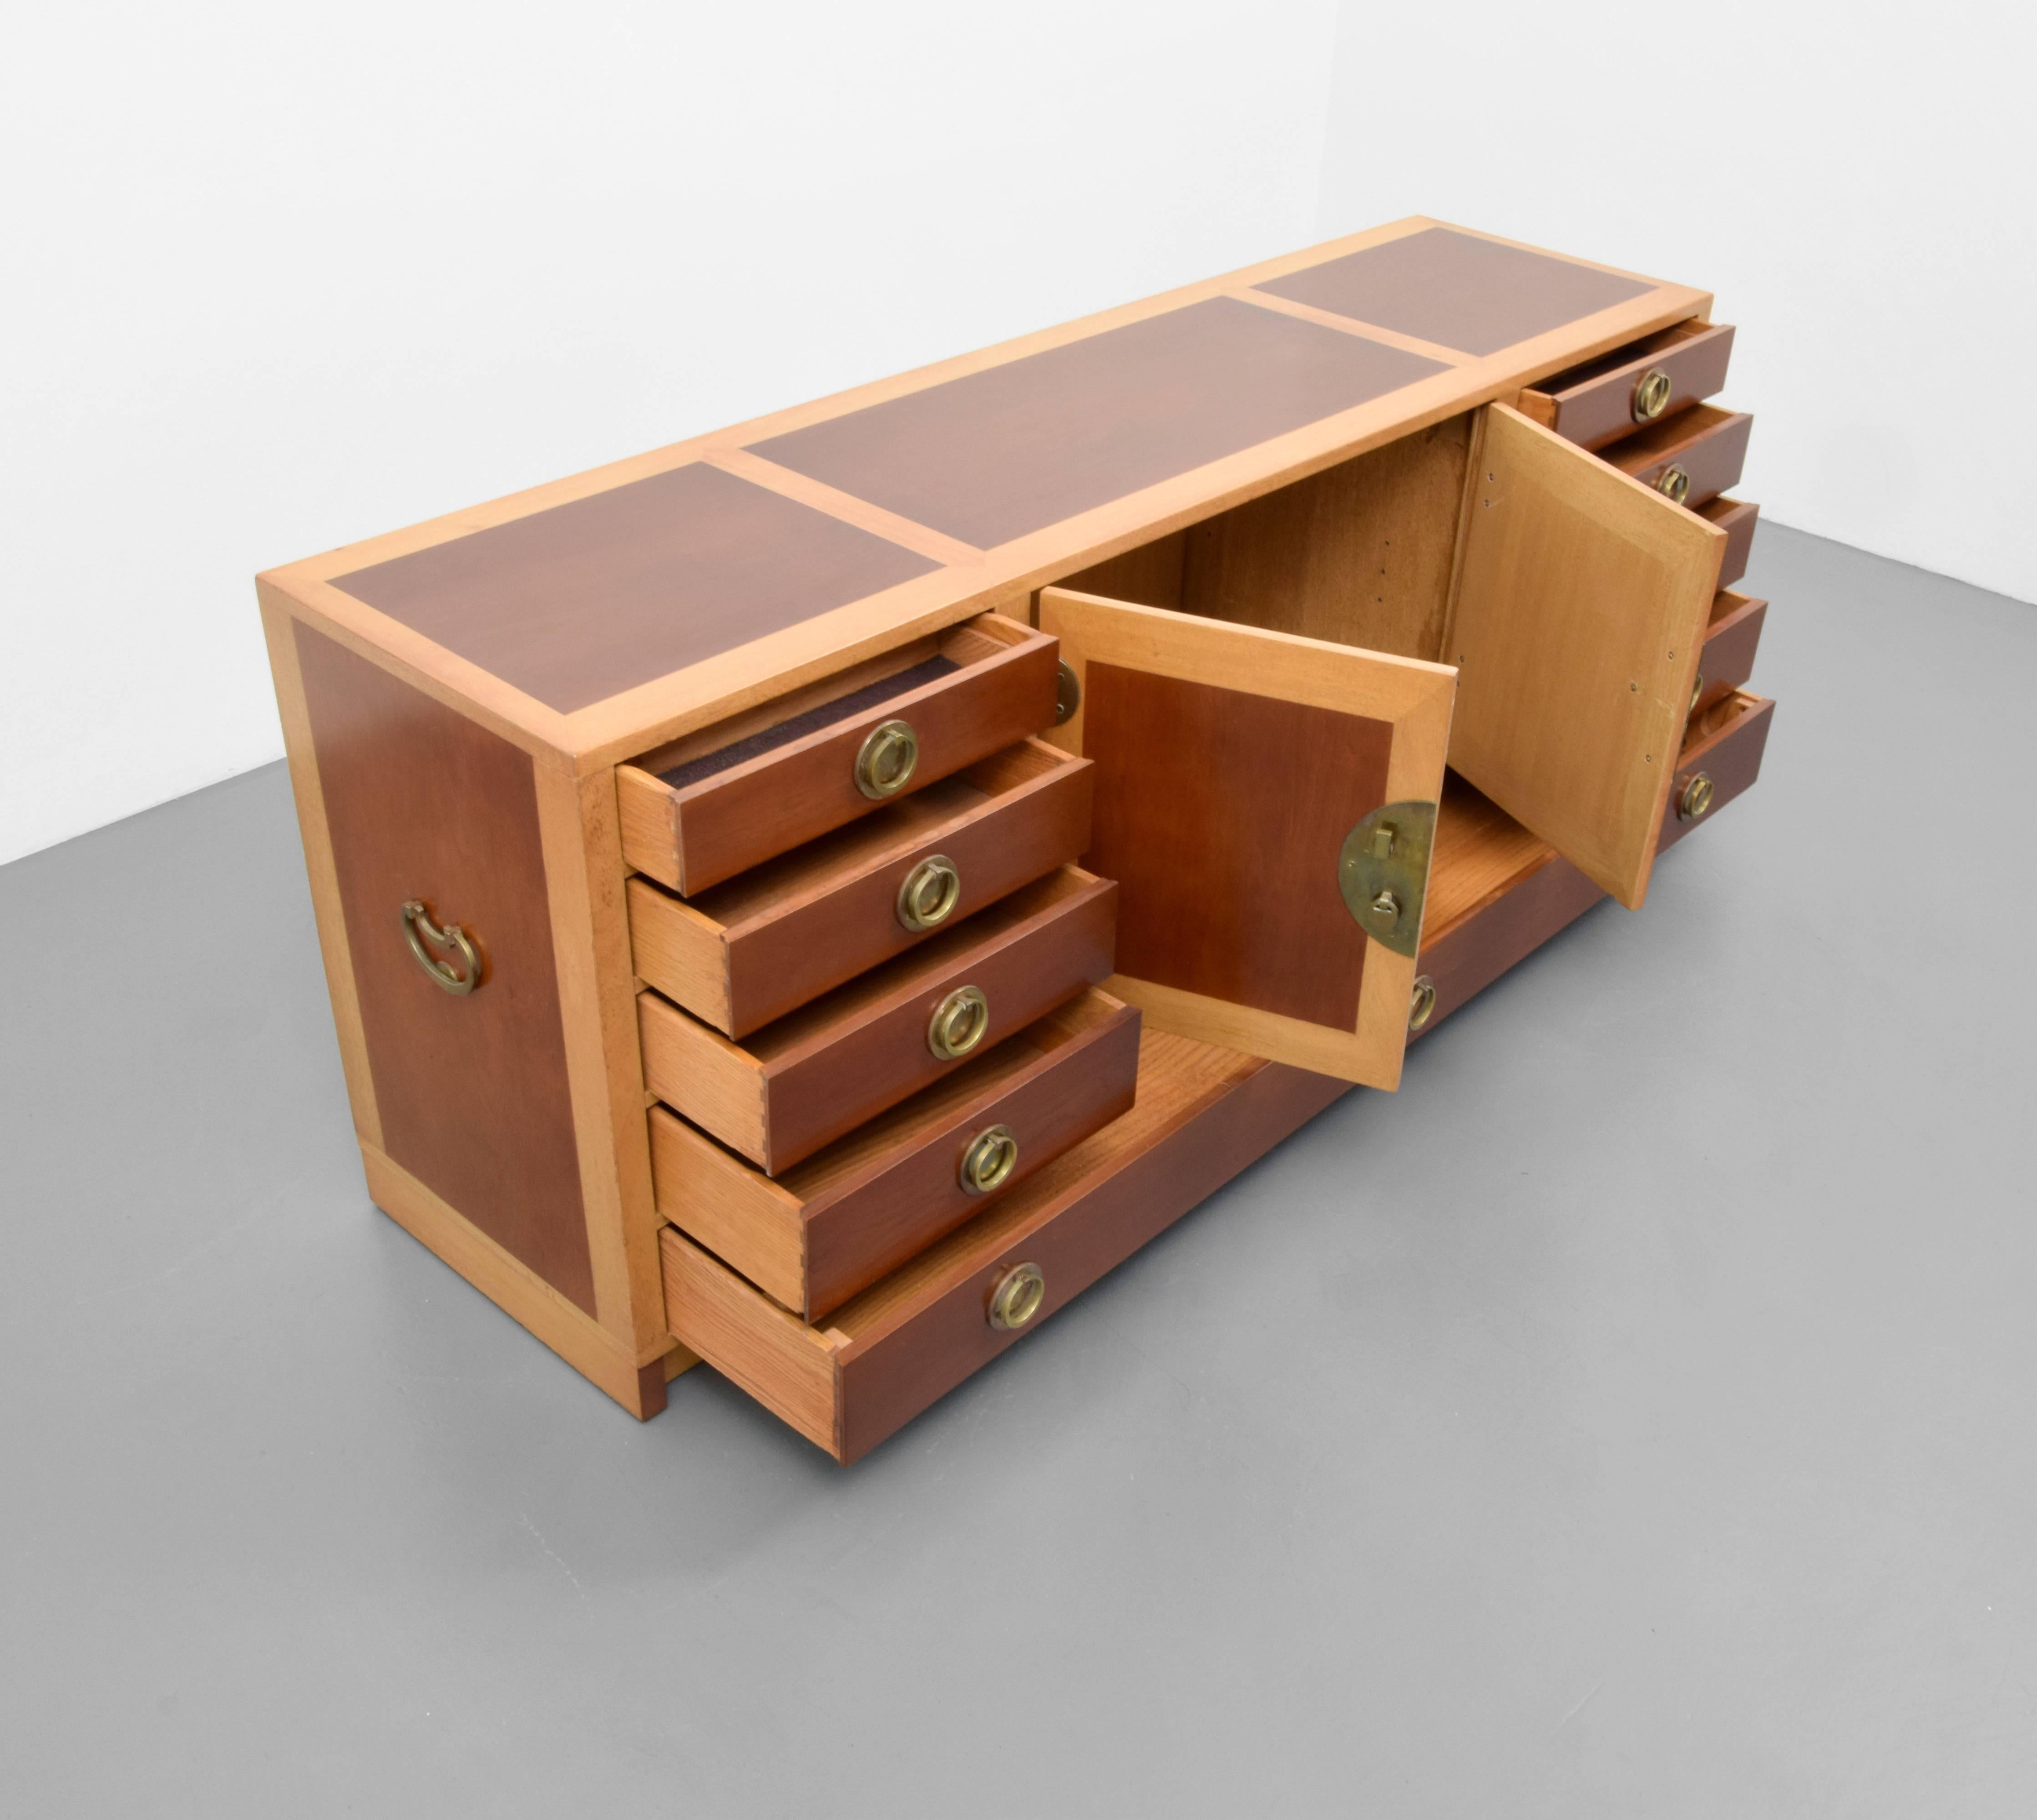 Cabinet/server/buffet features eight drawers: two drawers with separators, one drawer the length of the cabinet and two doors revealing storage and holes for an adjustable shelf.

Edward Wormley's furniture designs utilized quality materials and